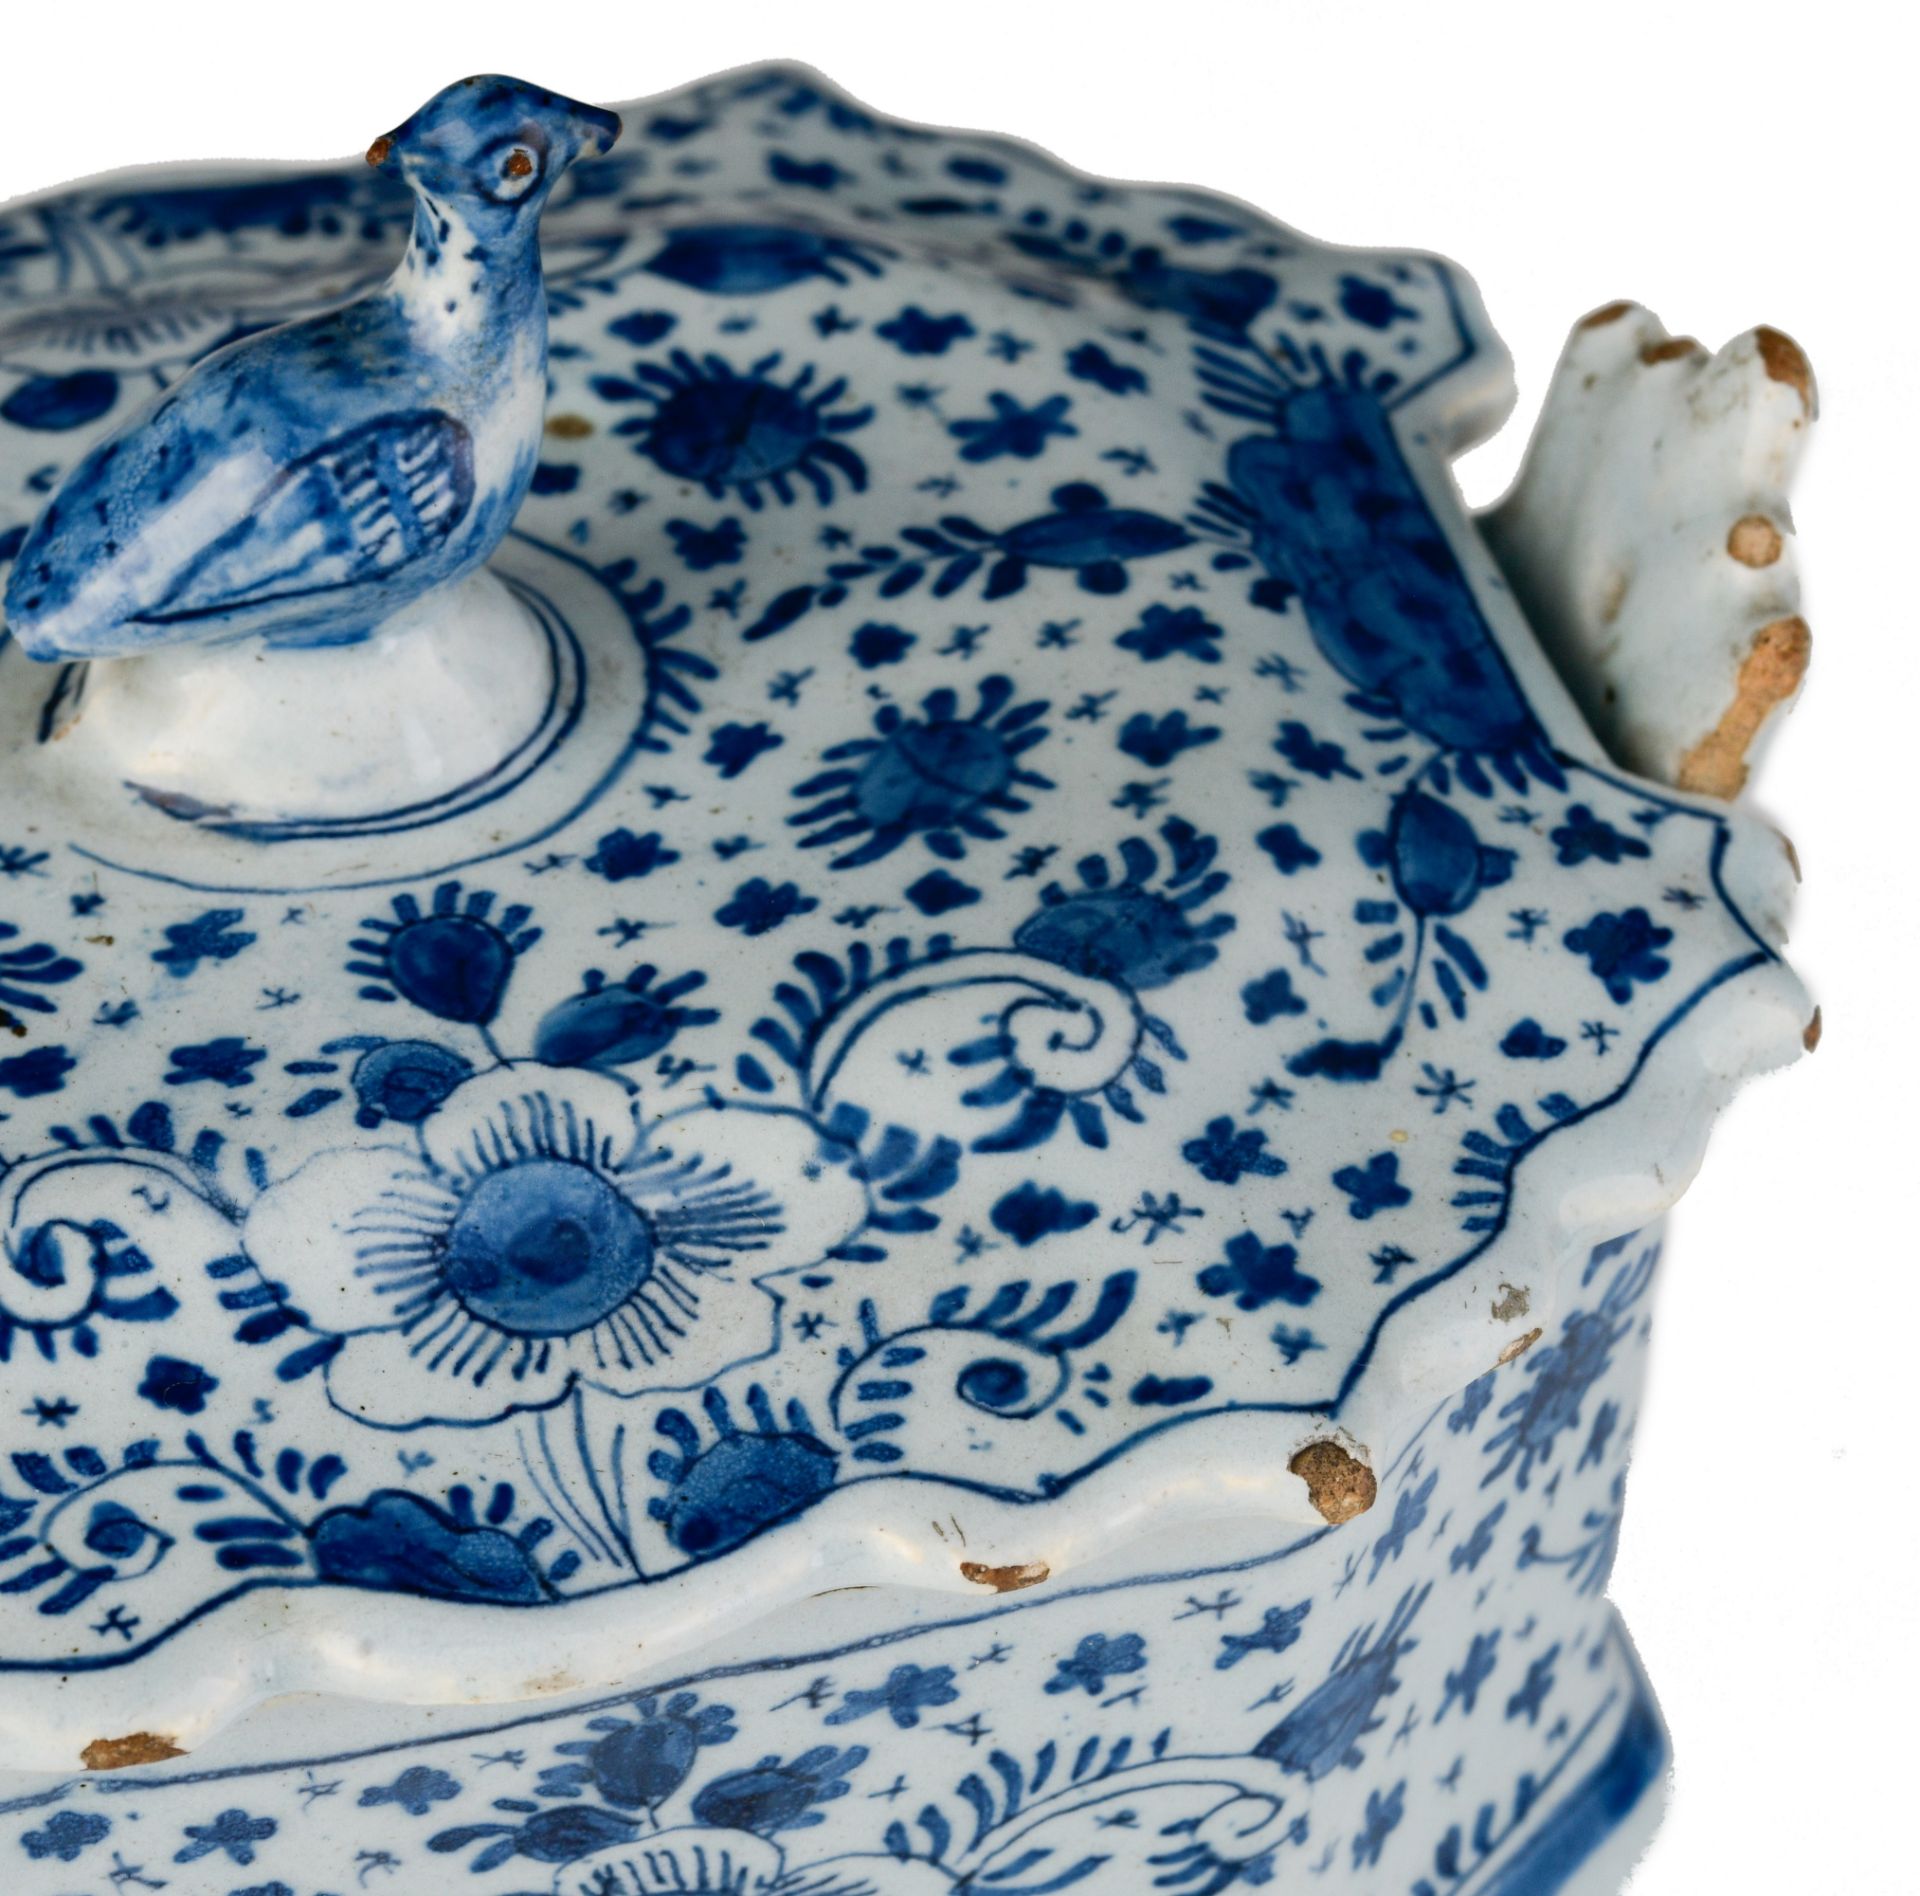 (BIDDING ONLY ON CARLOBONTE.BE) A fine Delft blue and white butter tub, marked 'De Lampetkan', 18thC - Image 11 of 14